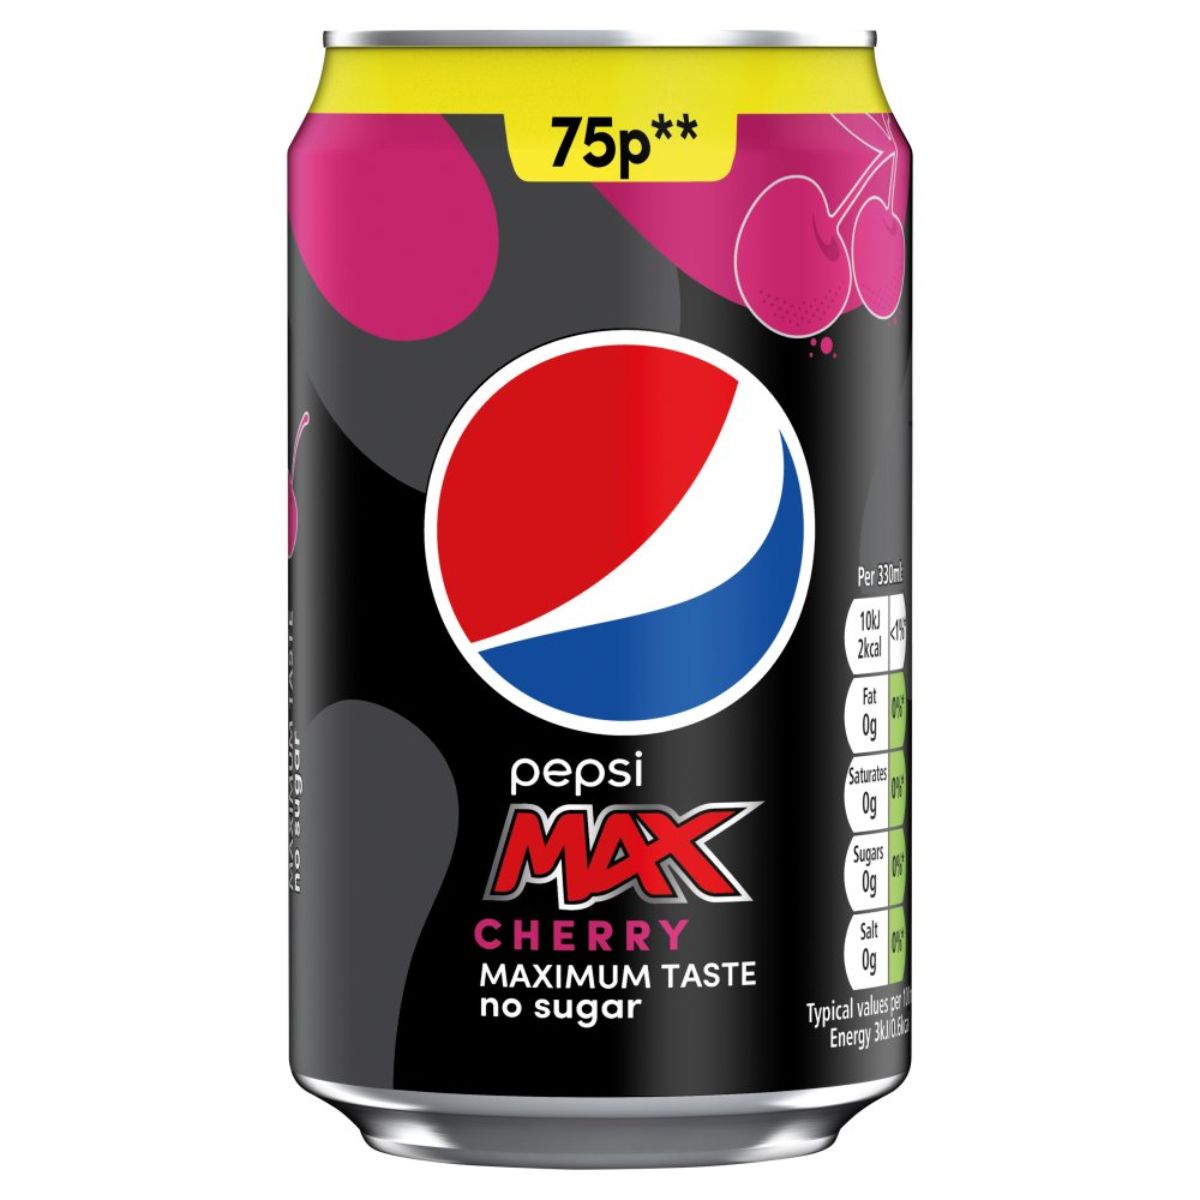 A can of Pepsi - Max Cherry - 330ml on a white background.